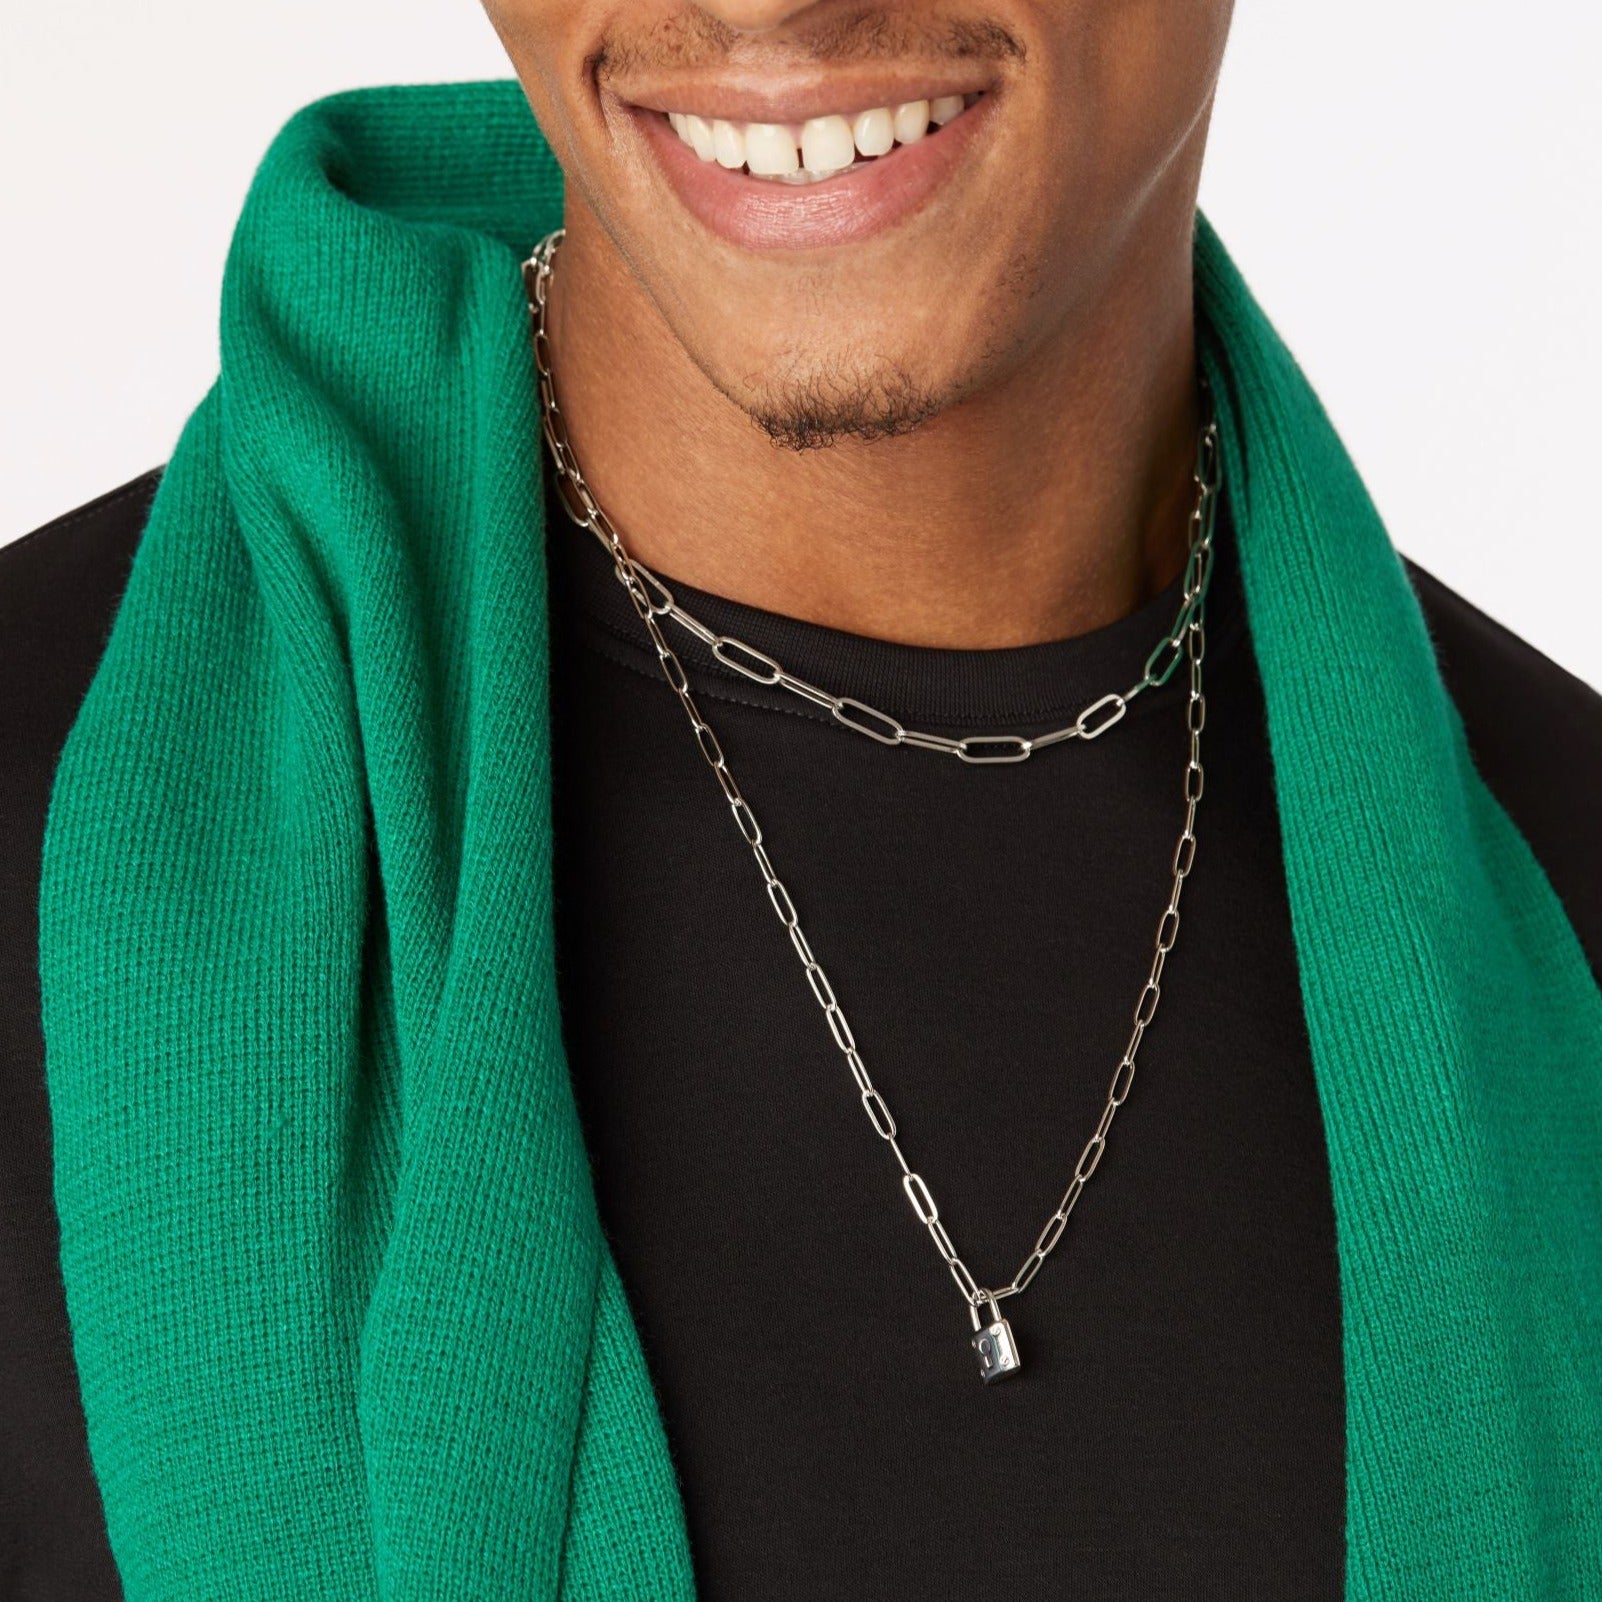 guy wearing green scarf and  silver titanium necklaces 